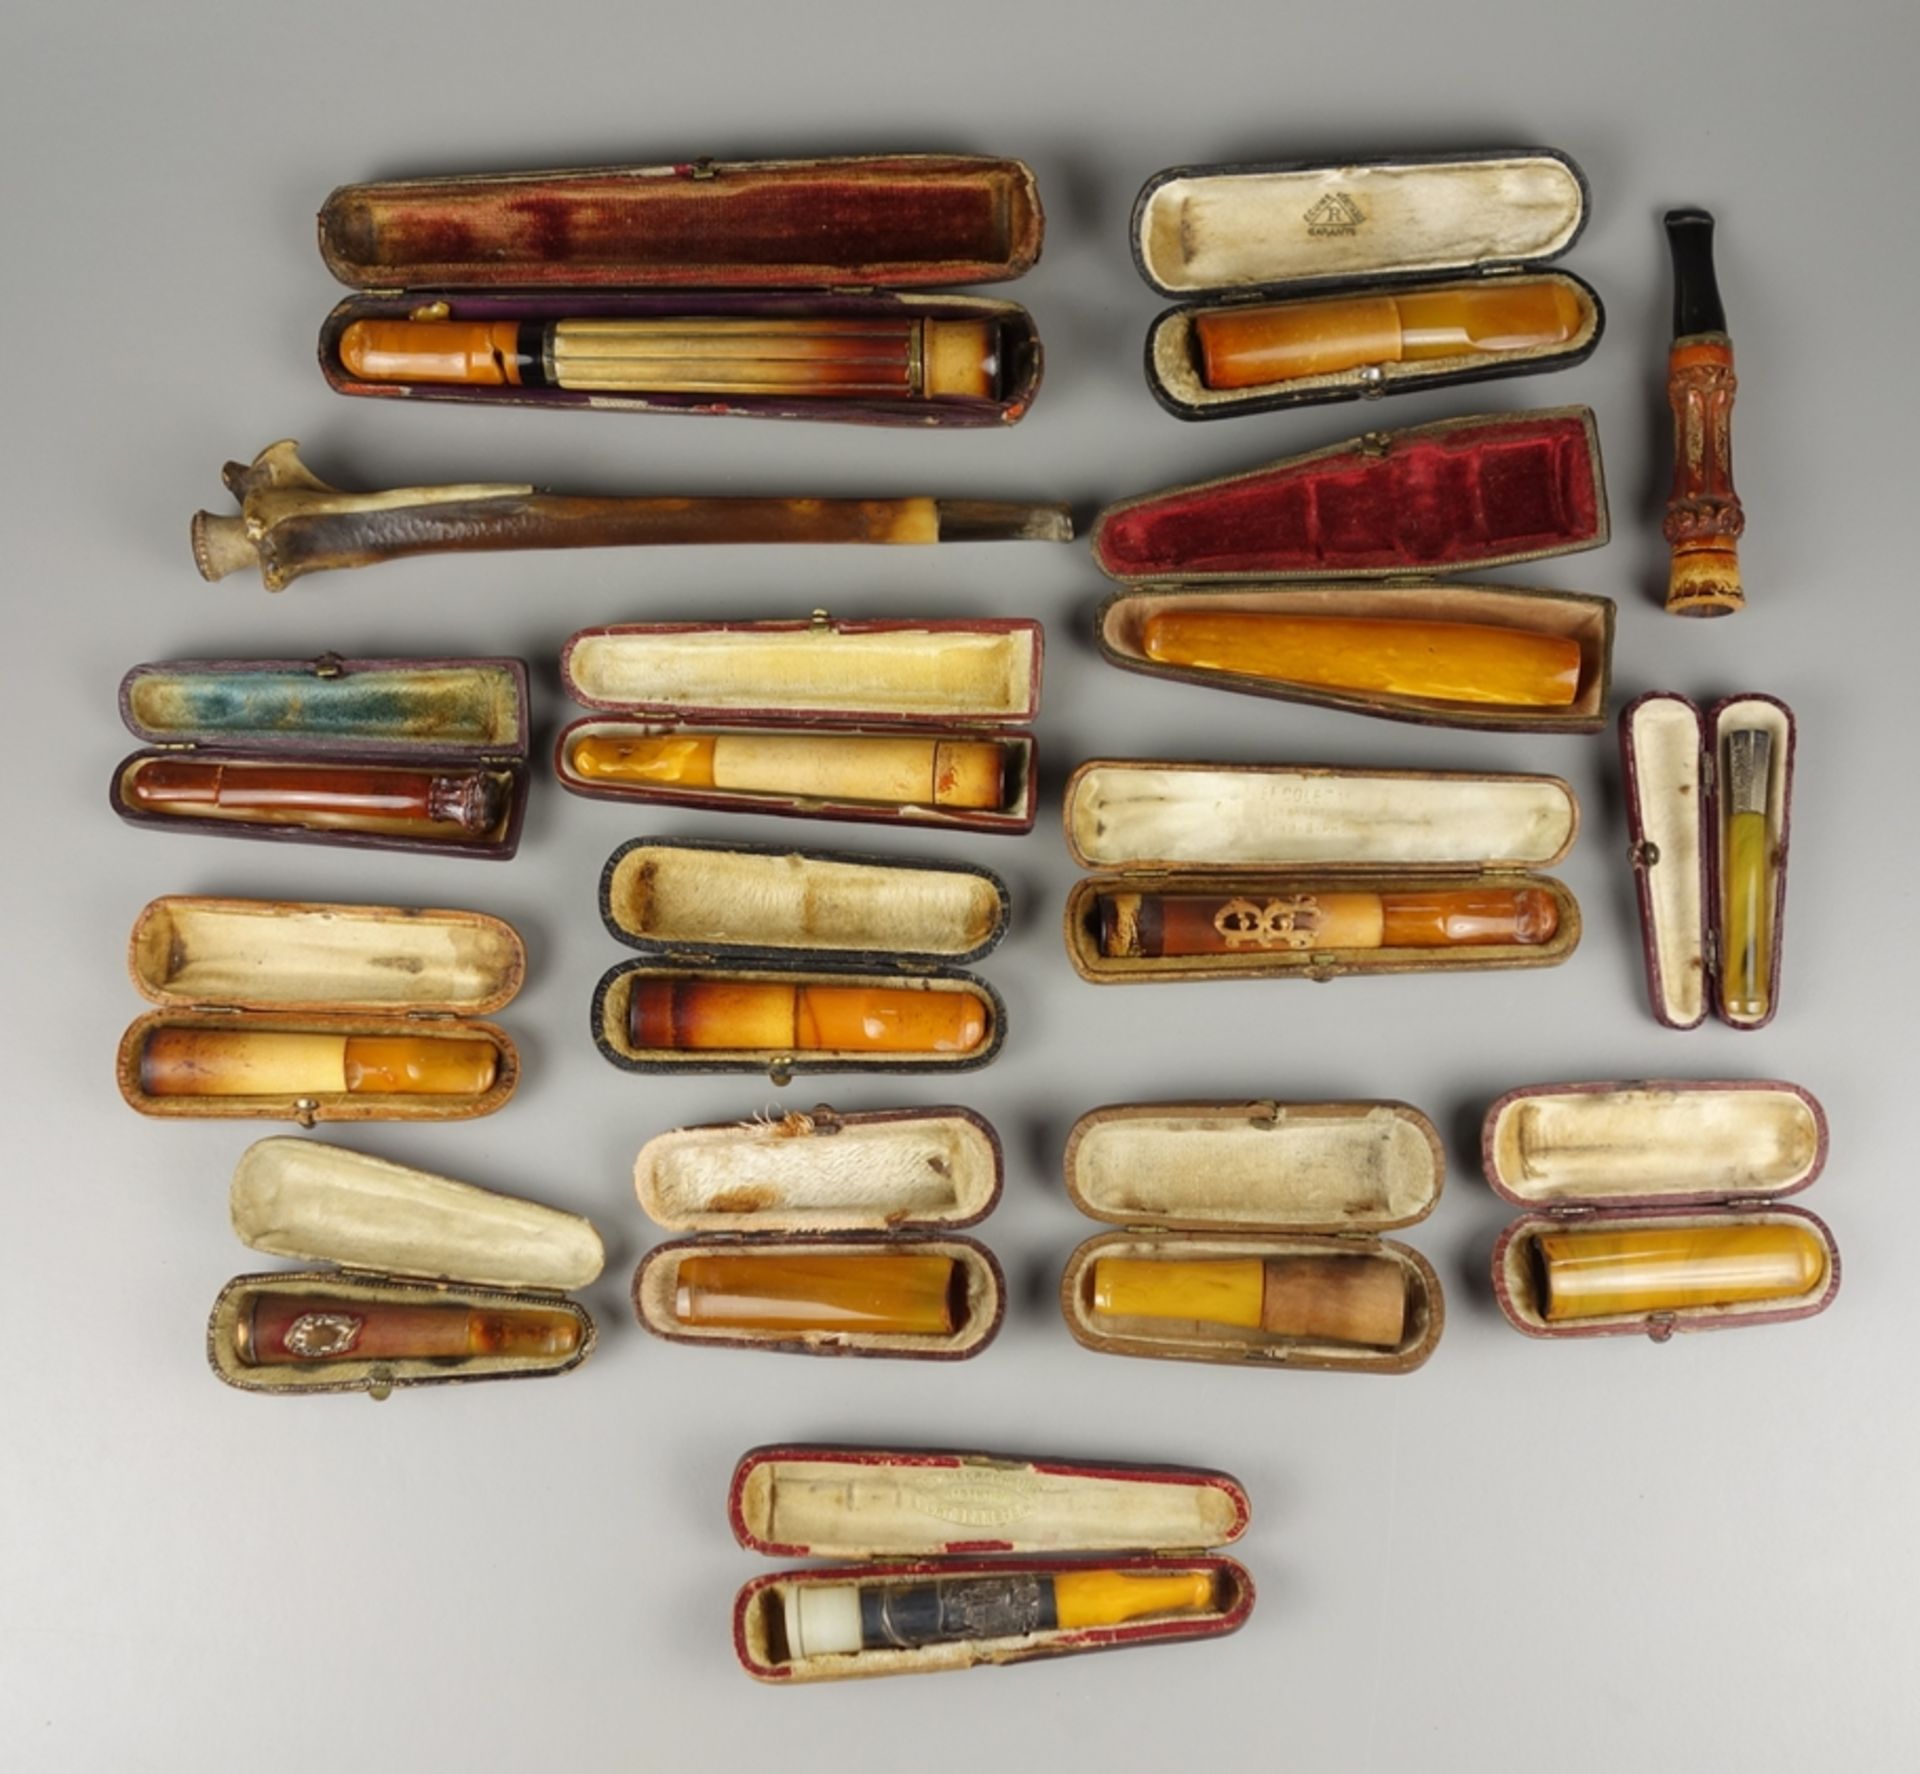 16 cigar and cigarette holders, partly amber, c. 1890-1920